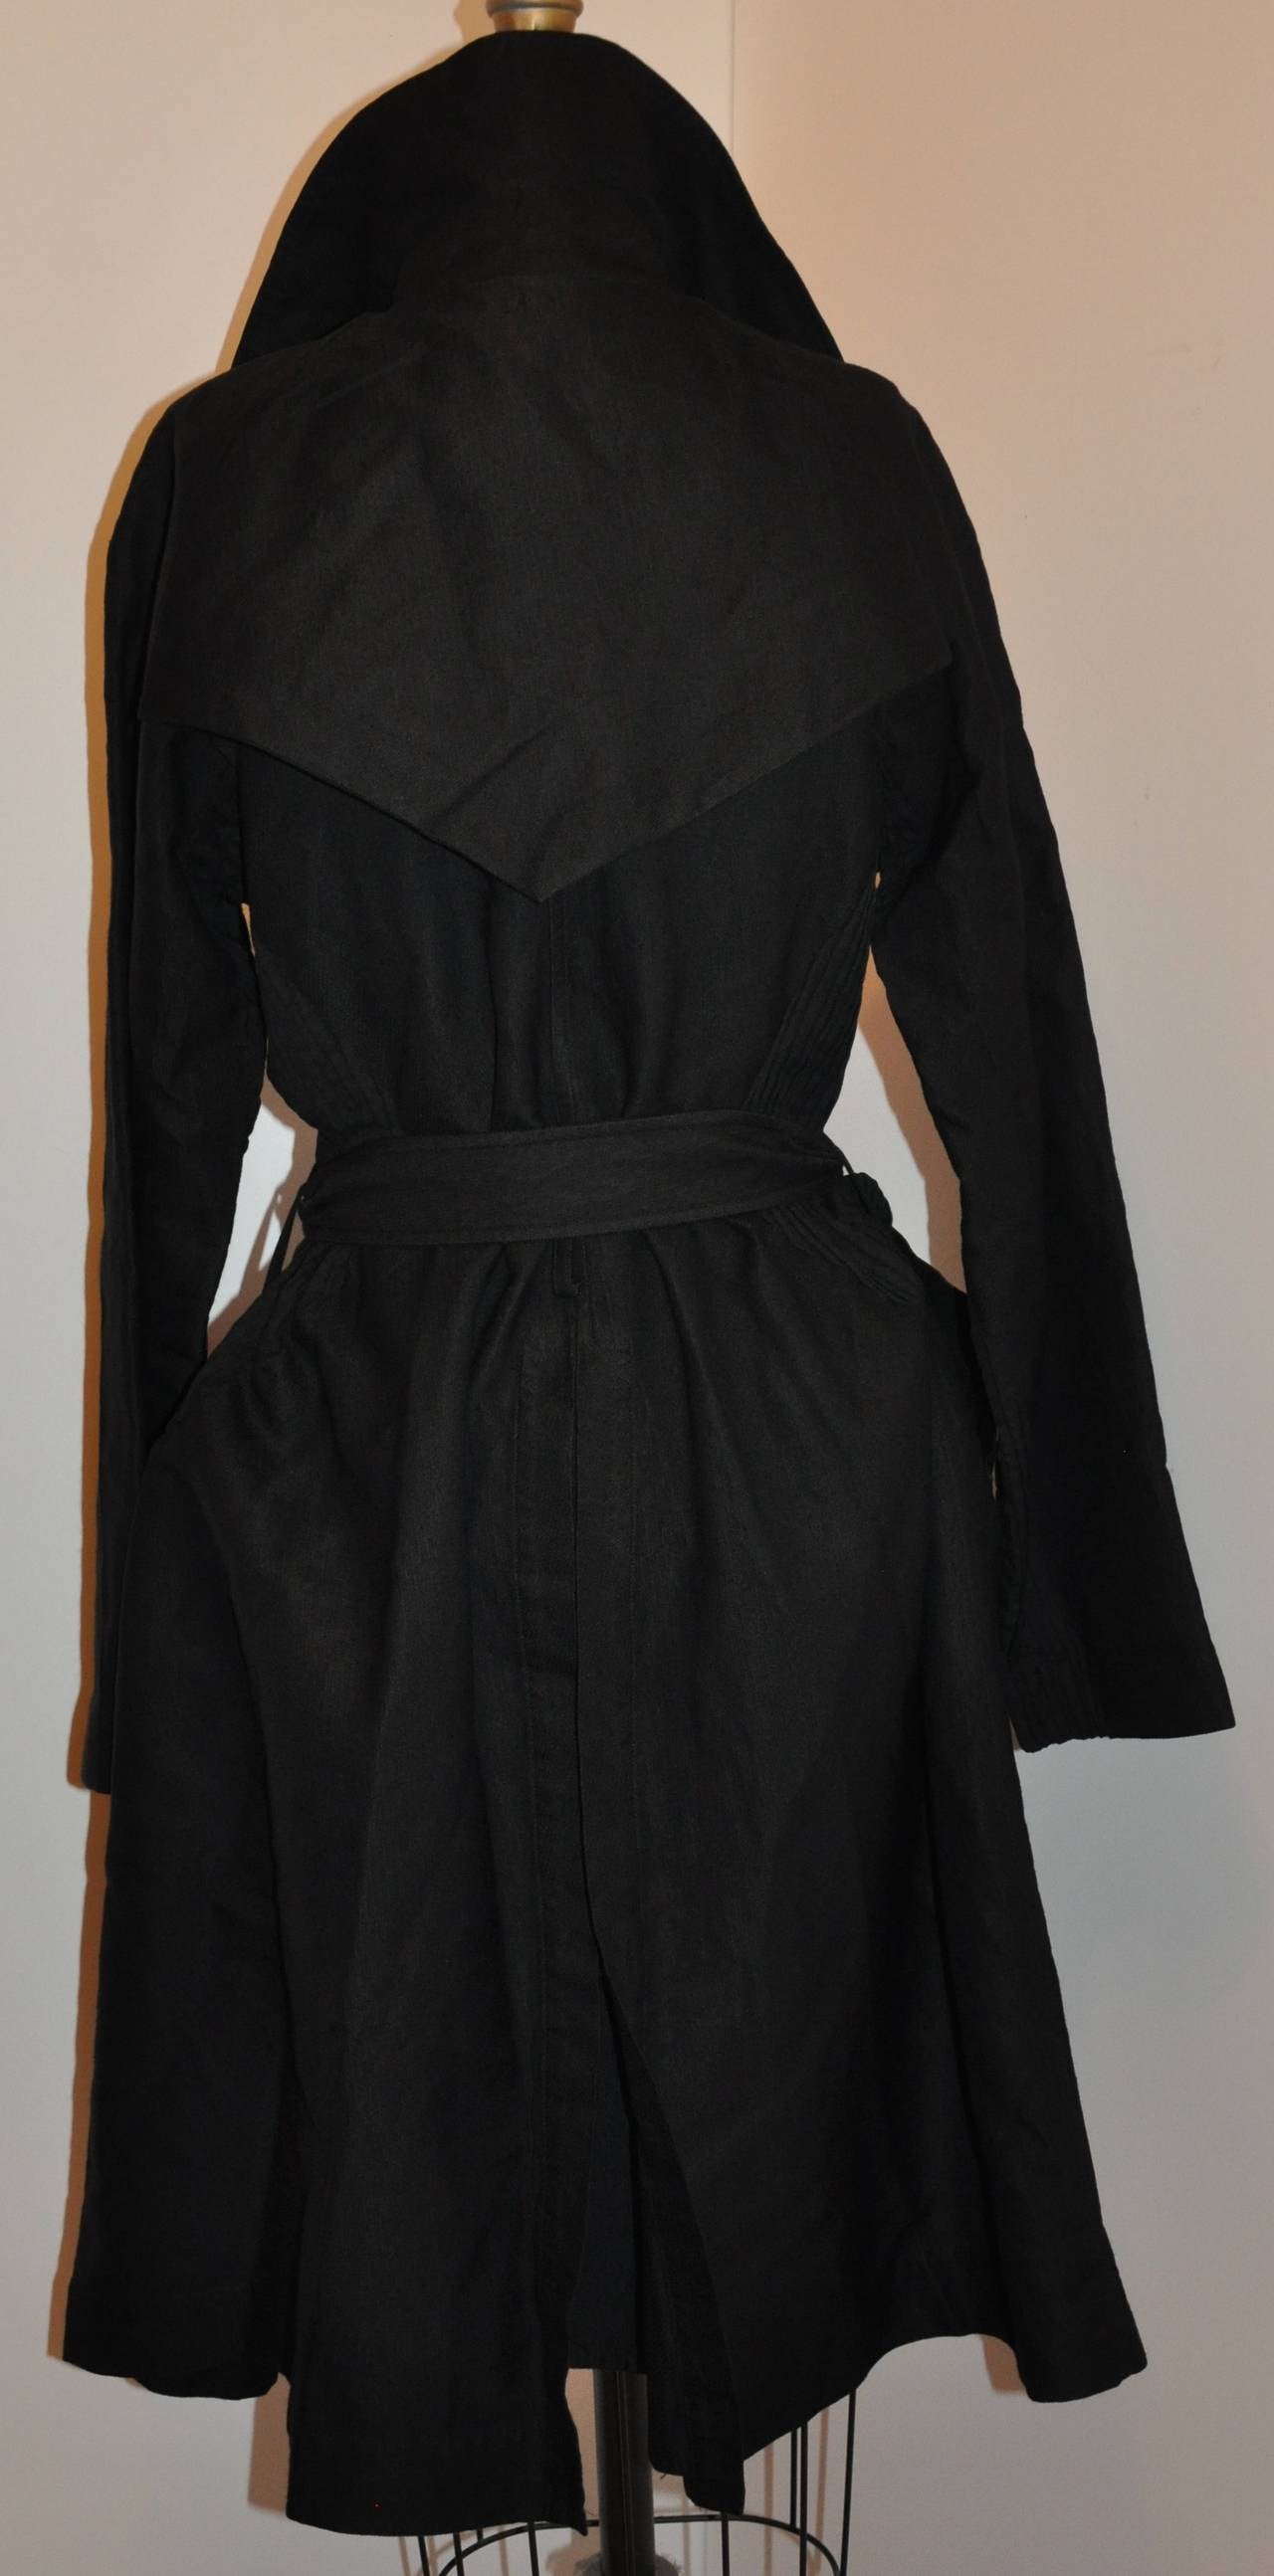 Issey Miyake's wonderfully detailed dramatic black trench-style coat with matching belt is bell-shaped from the waist down with two deep set-in pockets in front. The double-breasted  front has four (4) buttons including the collar which stands at 3